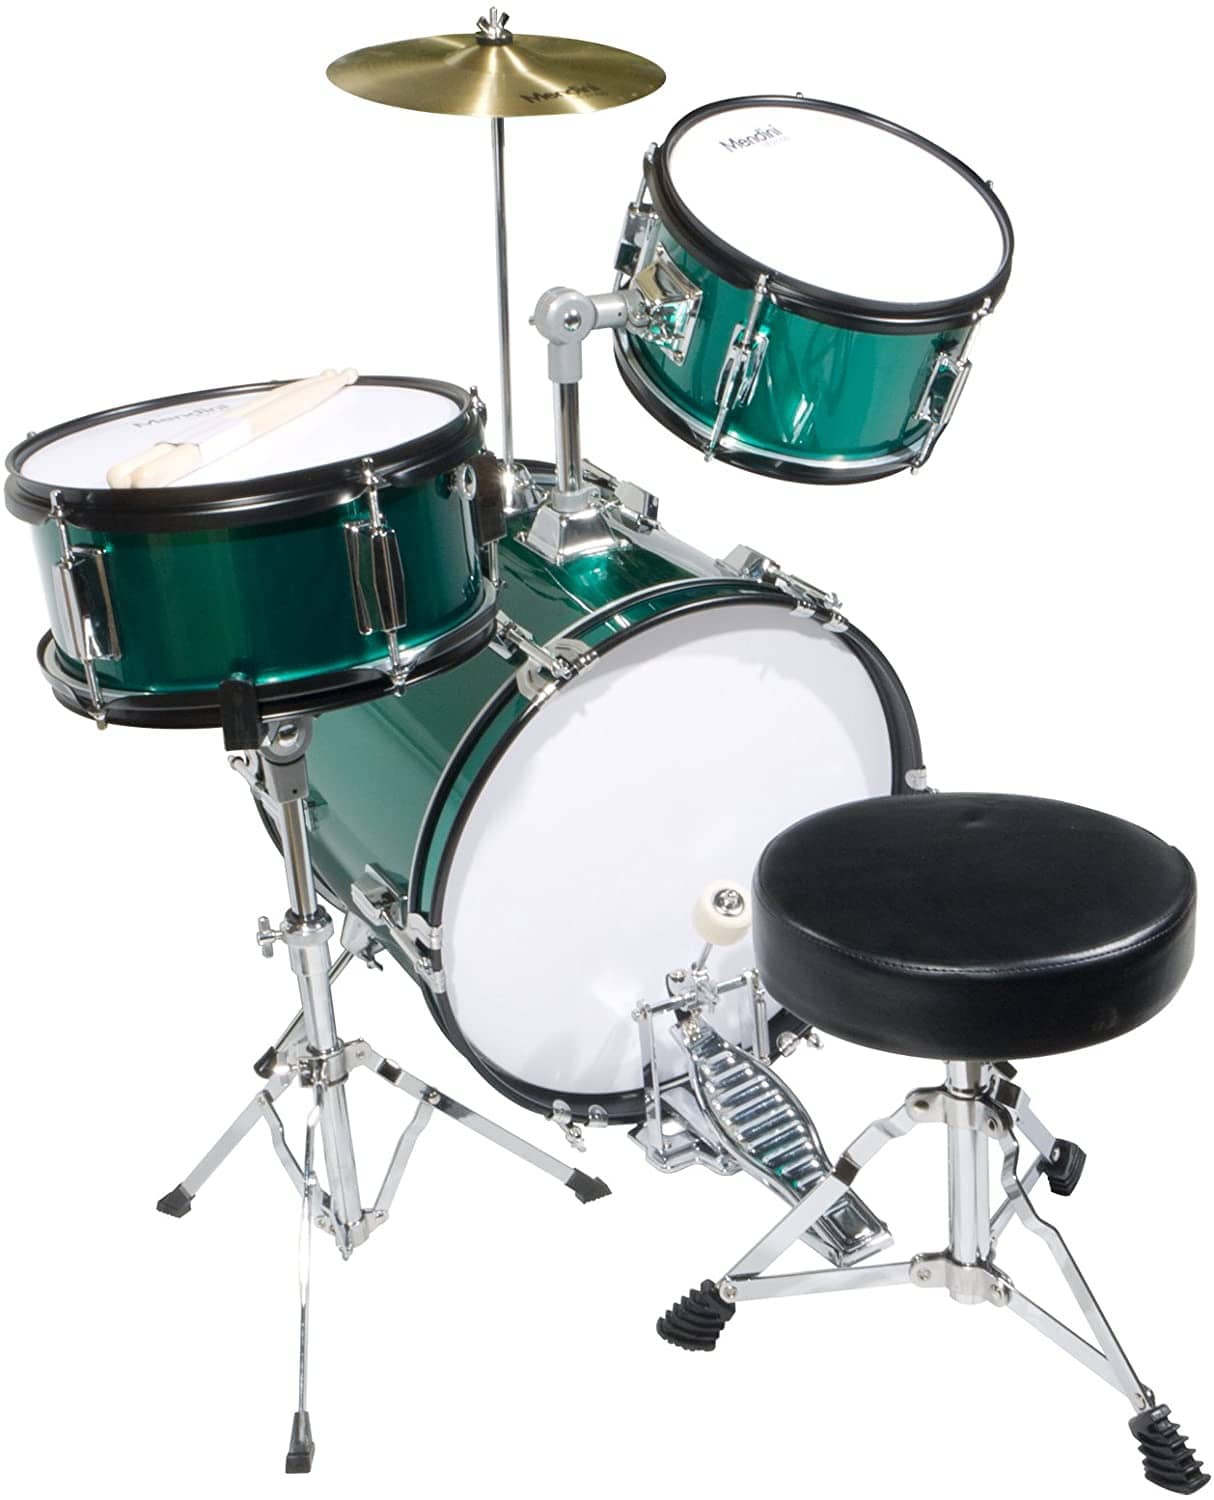 Mendini by Cecilio 16 inch 3-Piece Kids/Junior Drum Set with Adjustable Throne, Cymbal, Pedal & Drumsticks, Metallic Green, MJDS-3-GN 30